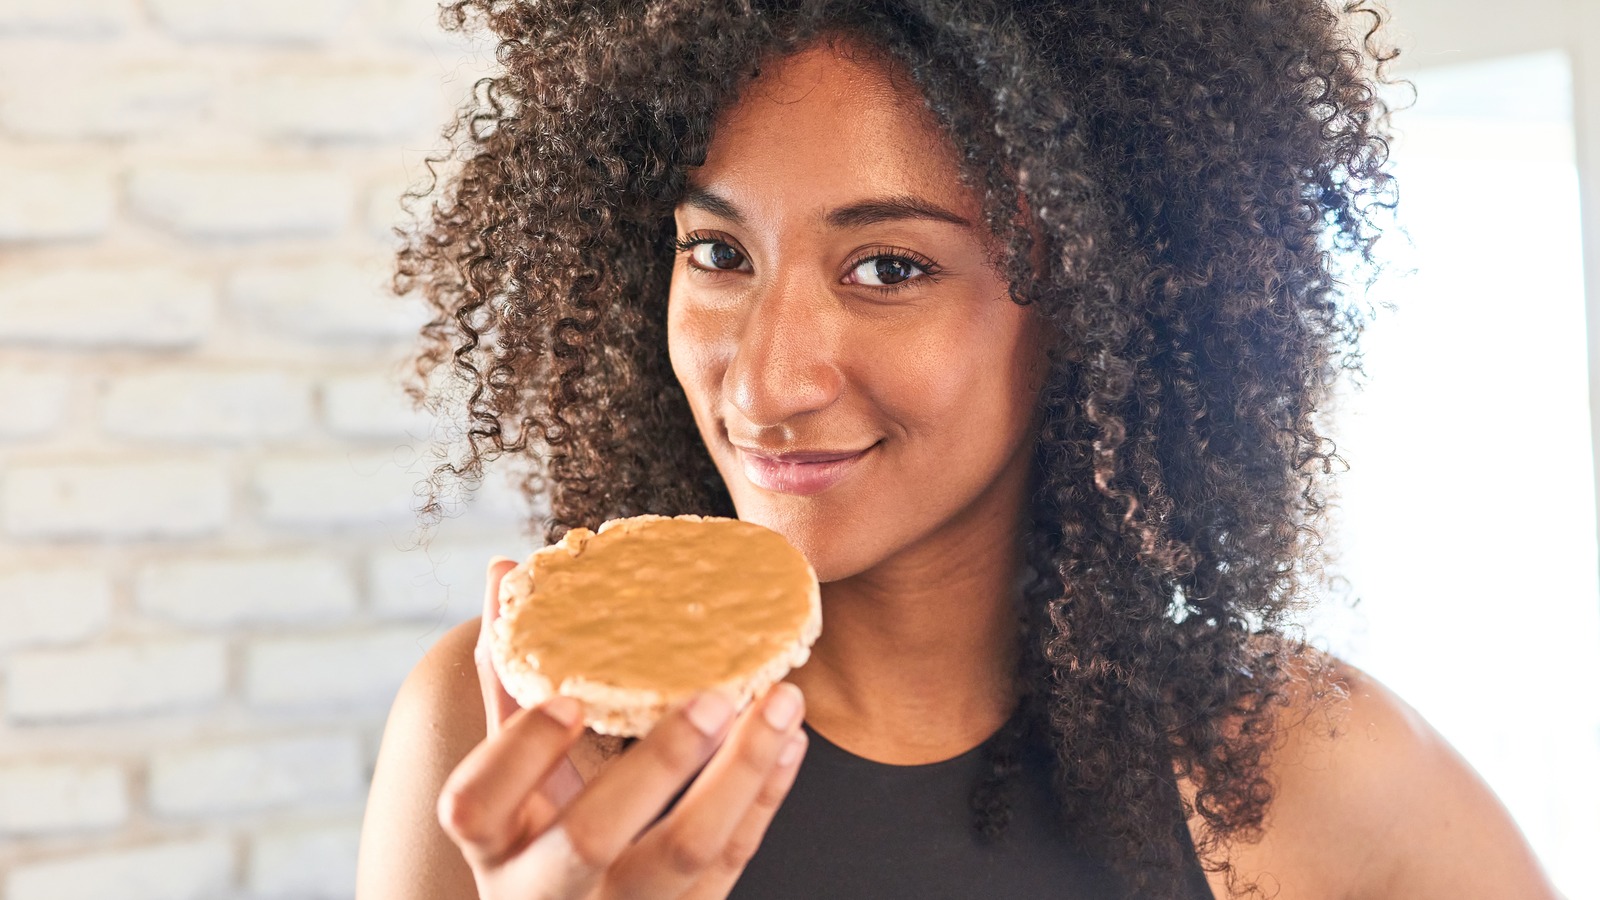 These Peanut Butter Alternatives Are Lower In Saturated Fat - Health Digest